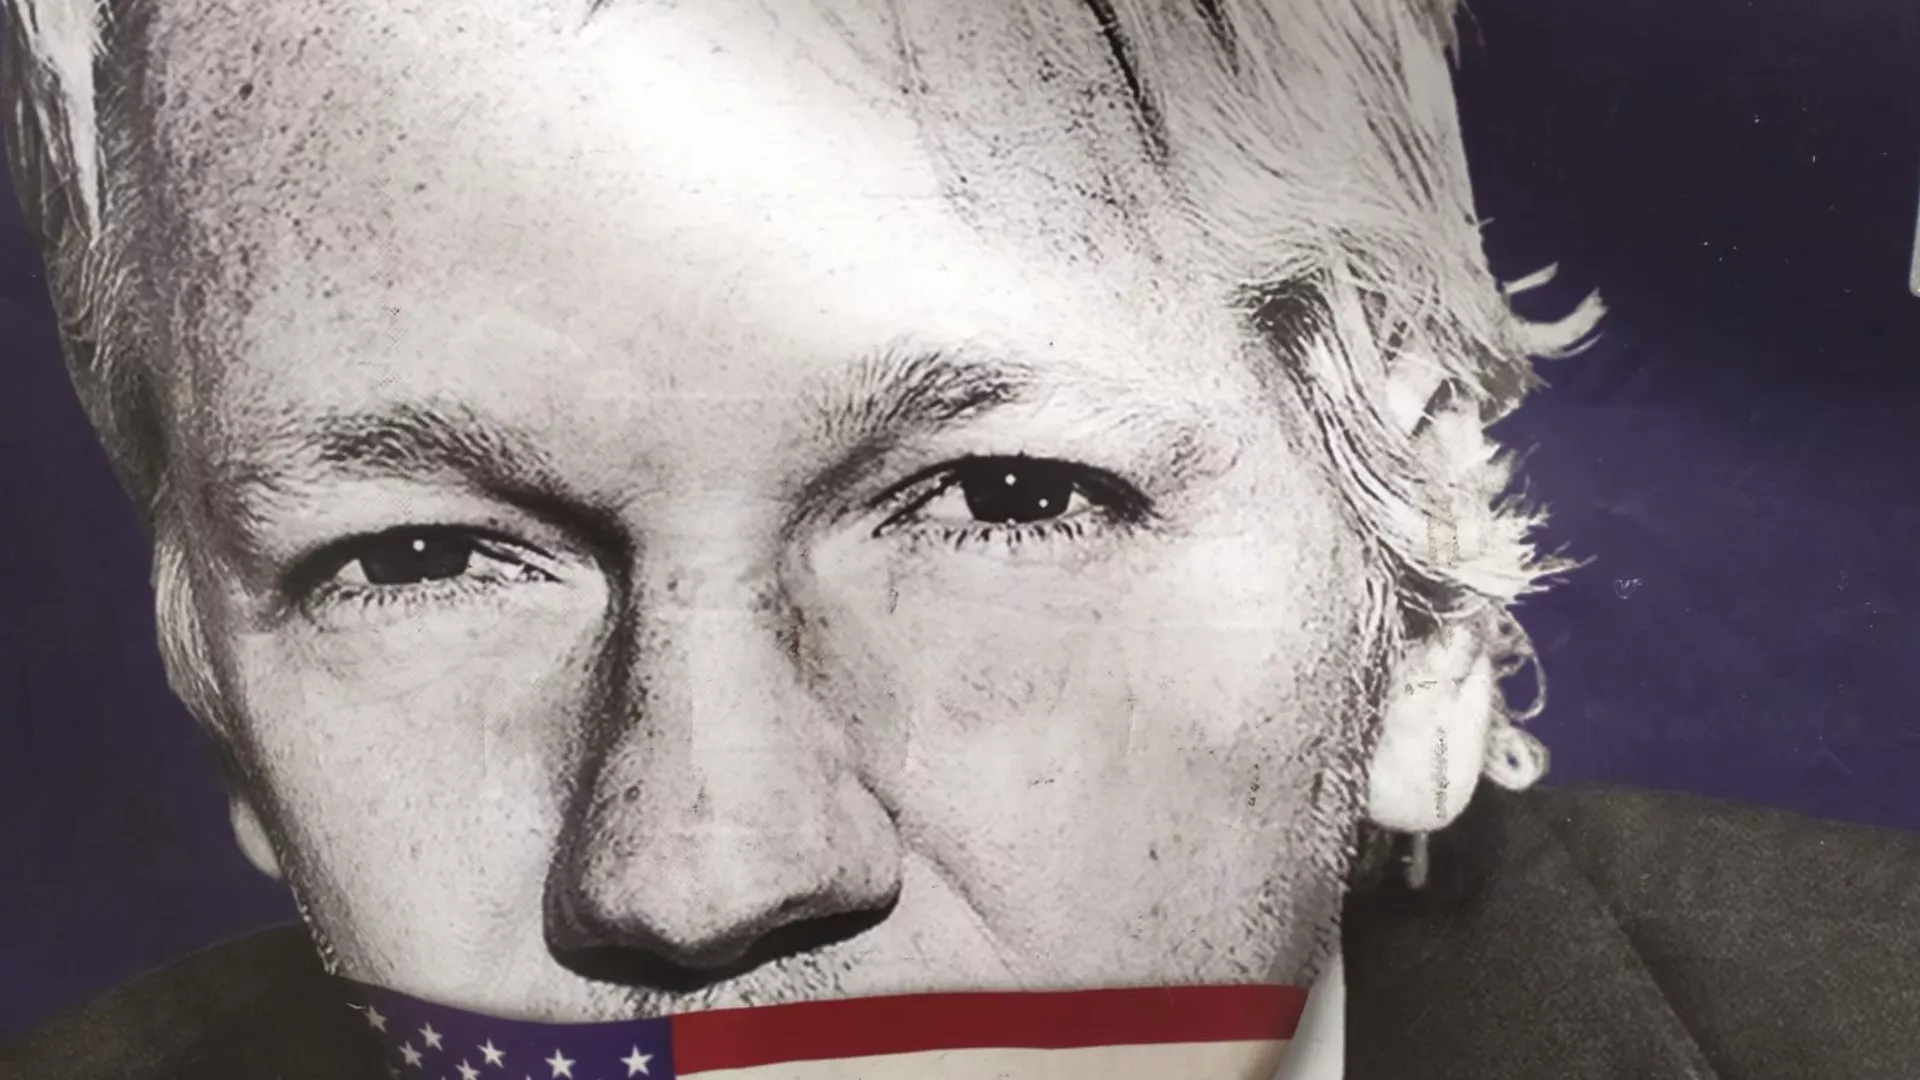 Pursuit of Assange Shows ‘Every Citizen on the Planet’ Subject to US Persecution